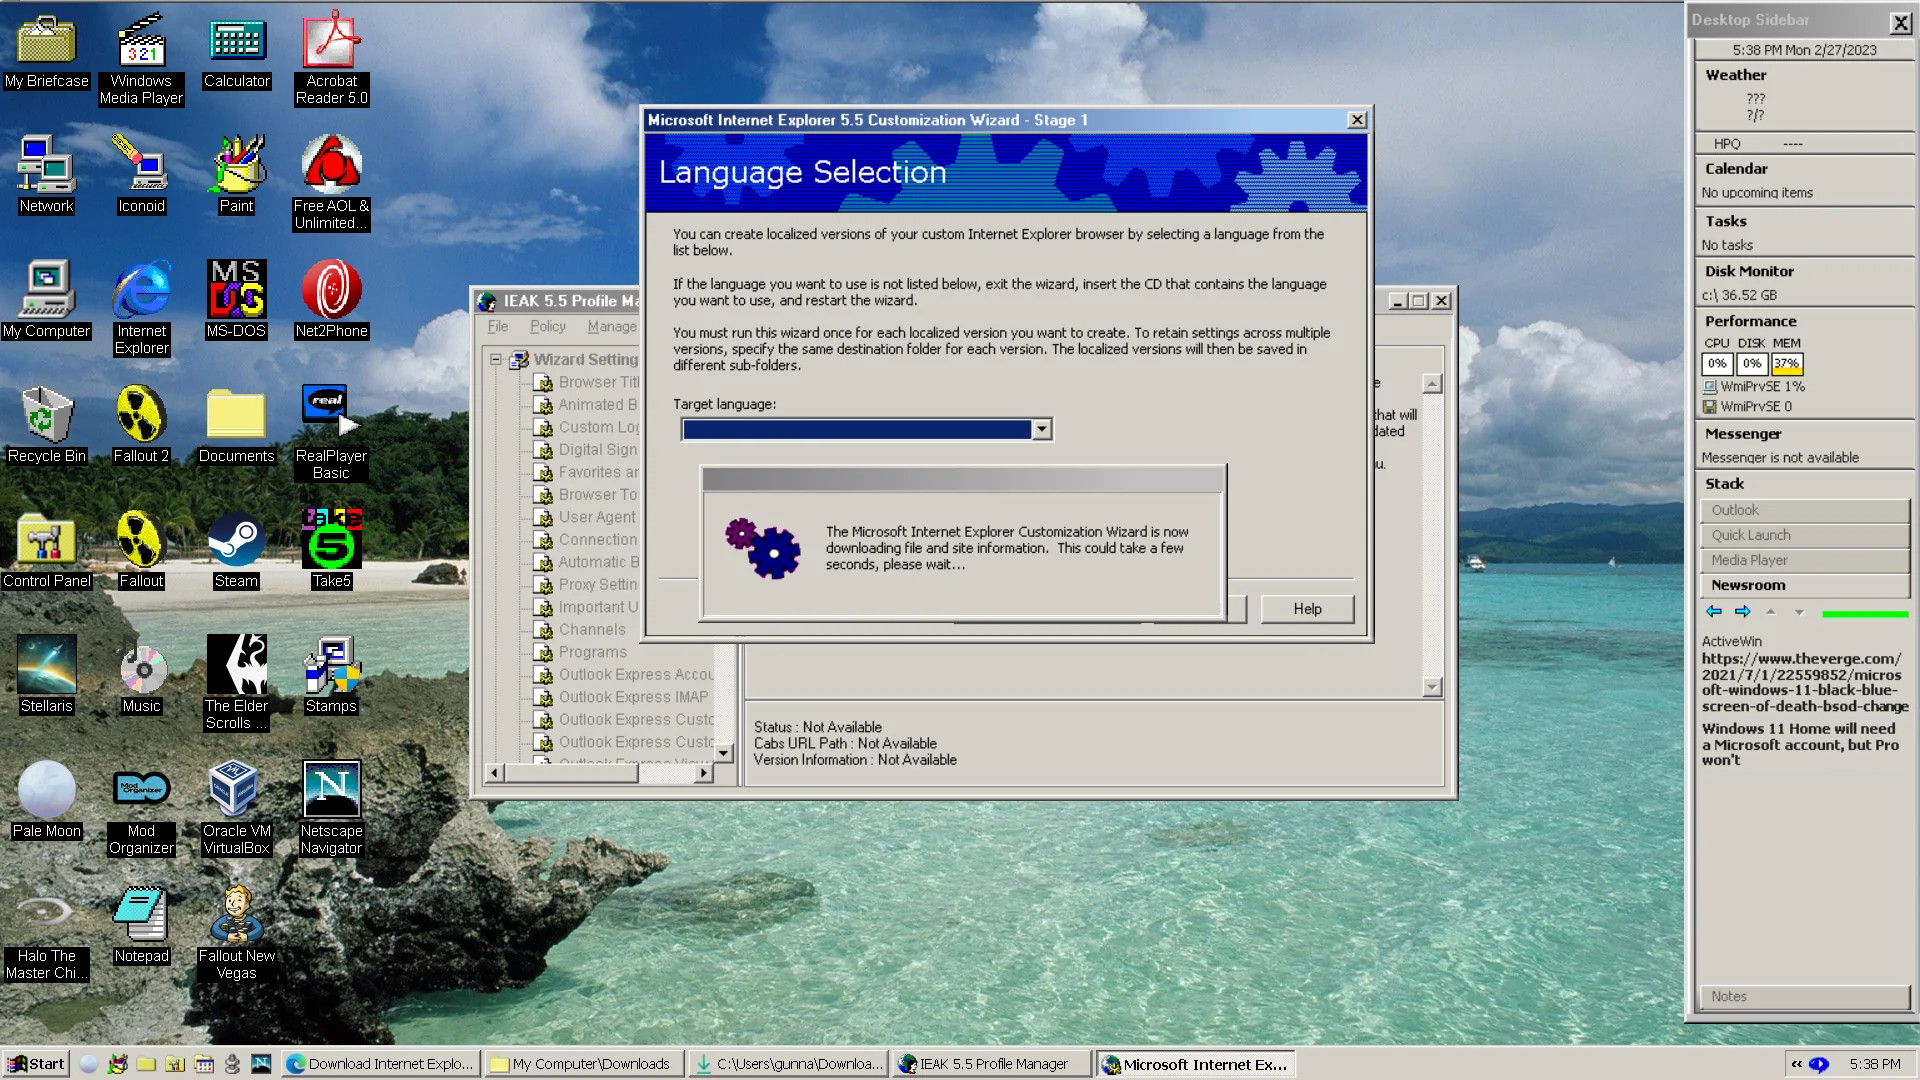 How to Add the Classic Windows 2000 Blue Background to Windows 10